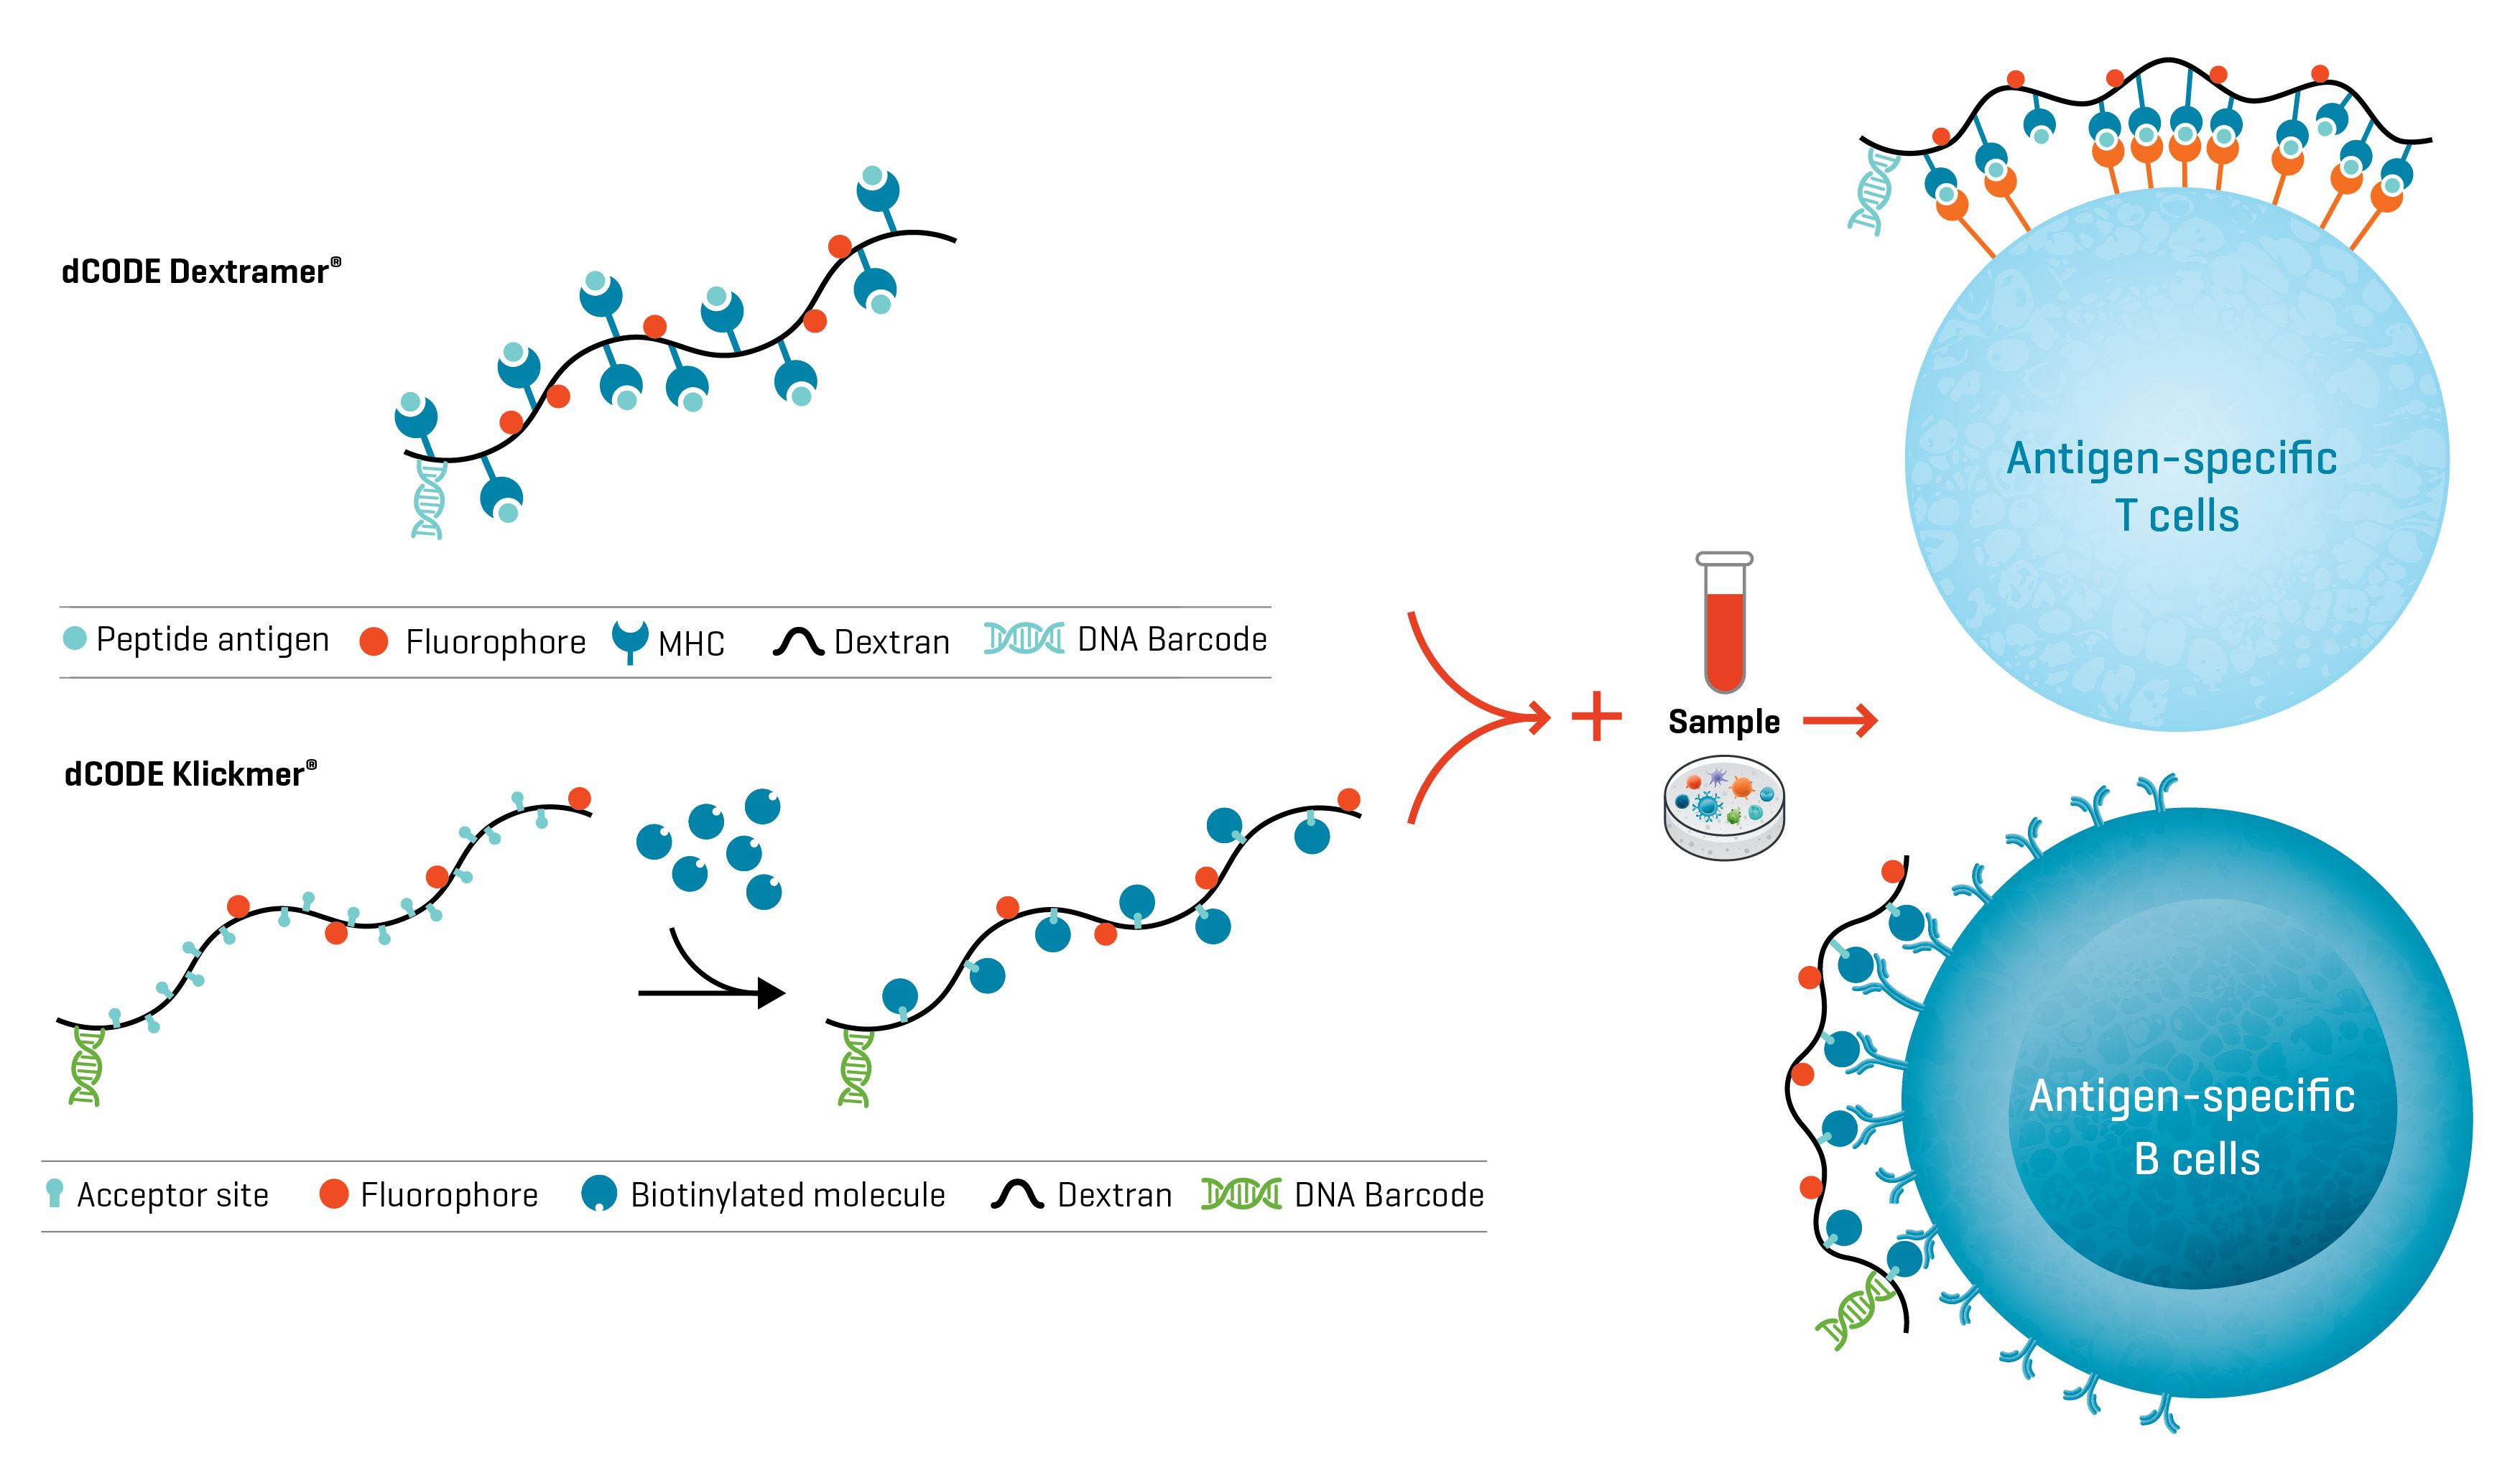 Fig. 1. d CODE® reagents from Immudex allow the detection and analysis of multiple antigen-specific population subsets of T cells and B cells in a single sample.